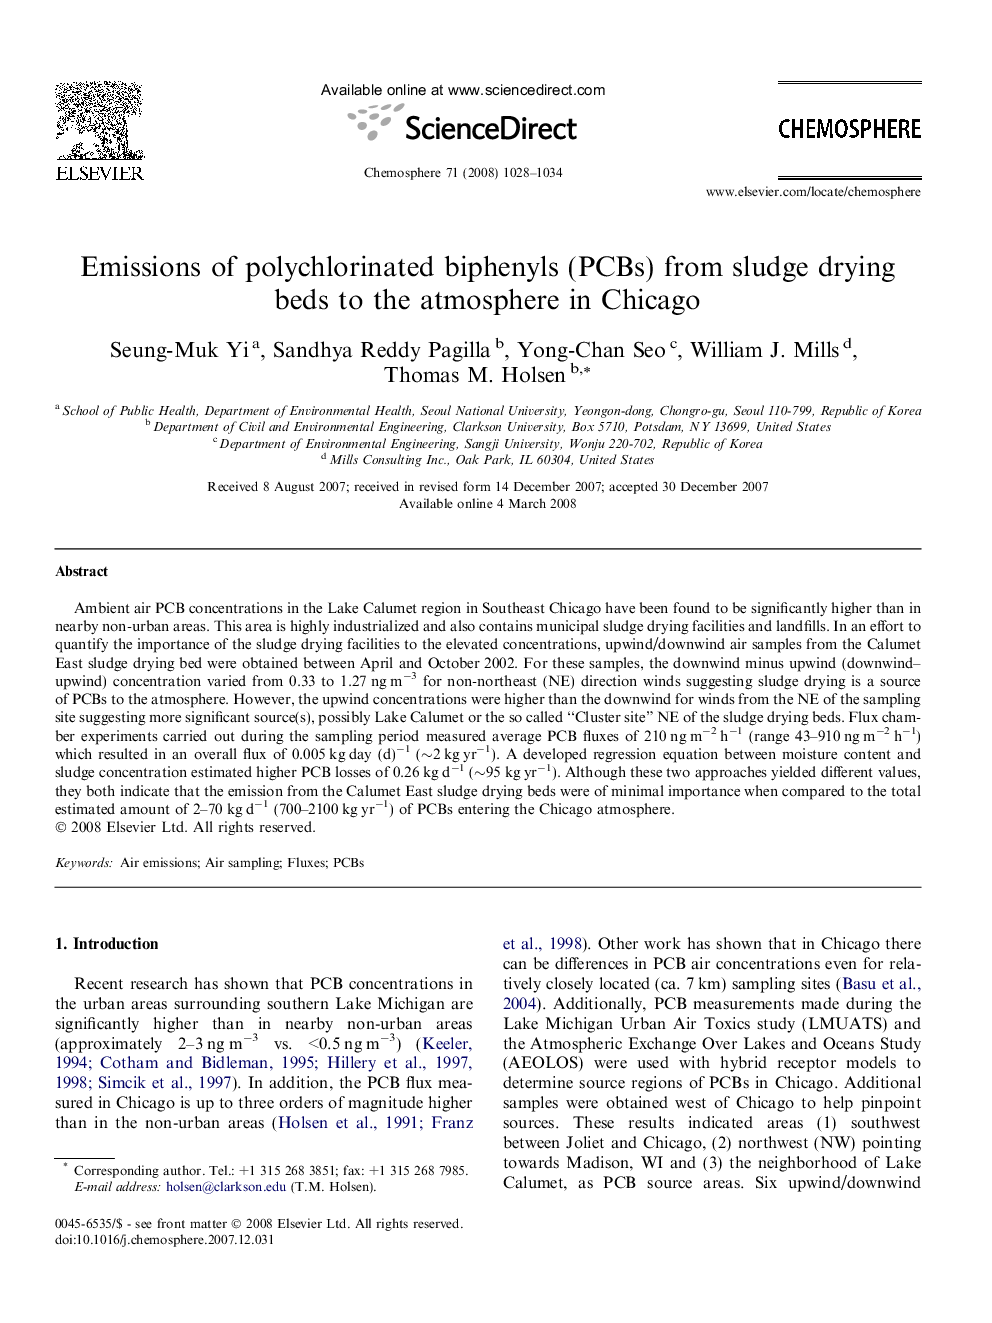 Emissions of polychlorinated biphenyls (PCBs) from sludge drying beds to the atmosphere in Chicago